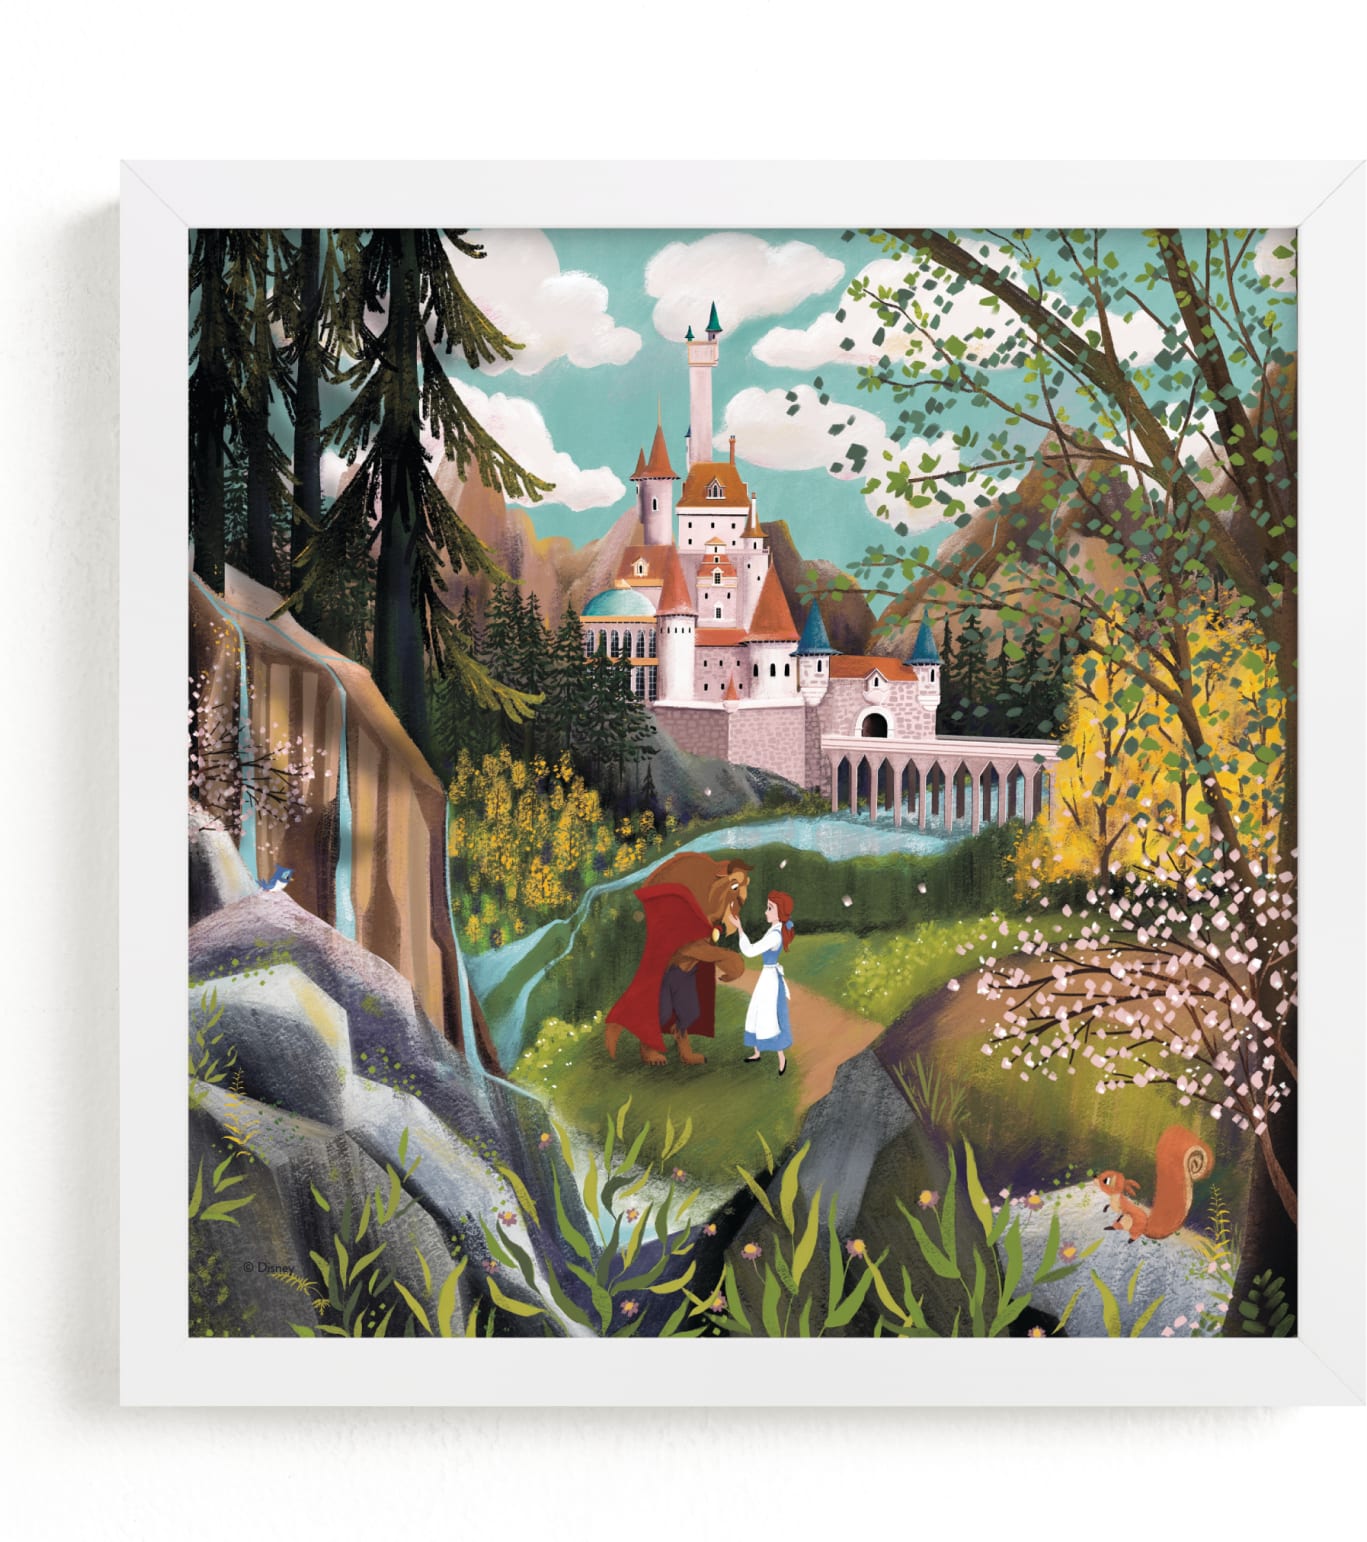 This is a brown disney art by Becky Nimoy called Disney Beauty And The Beast Castle Grounds.